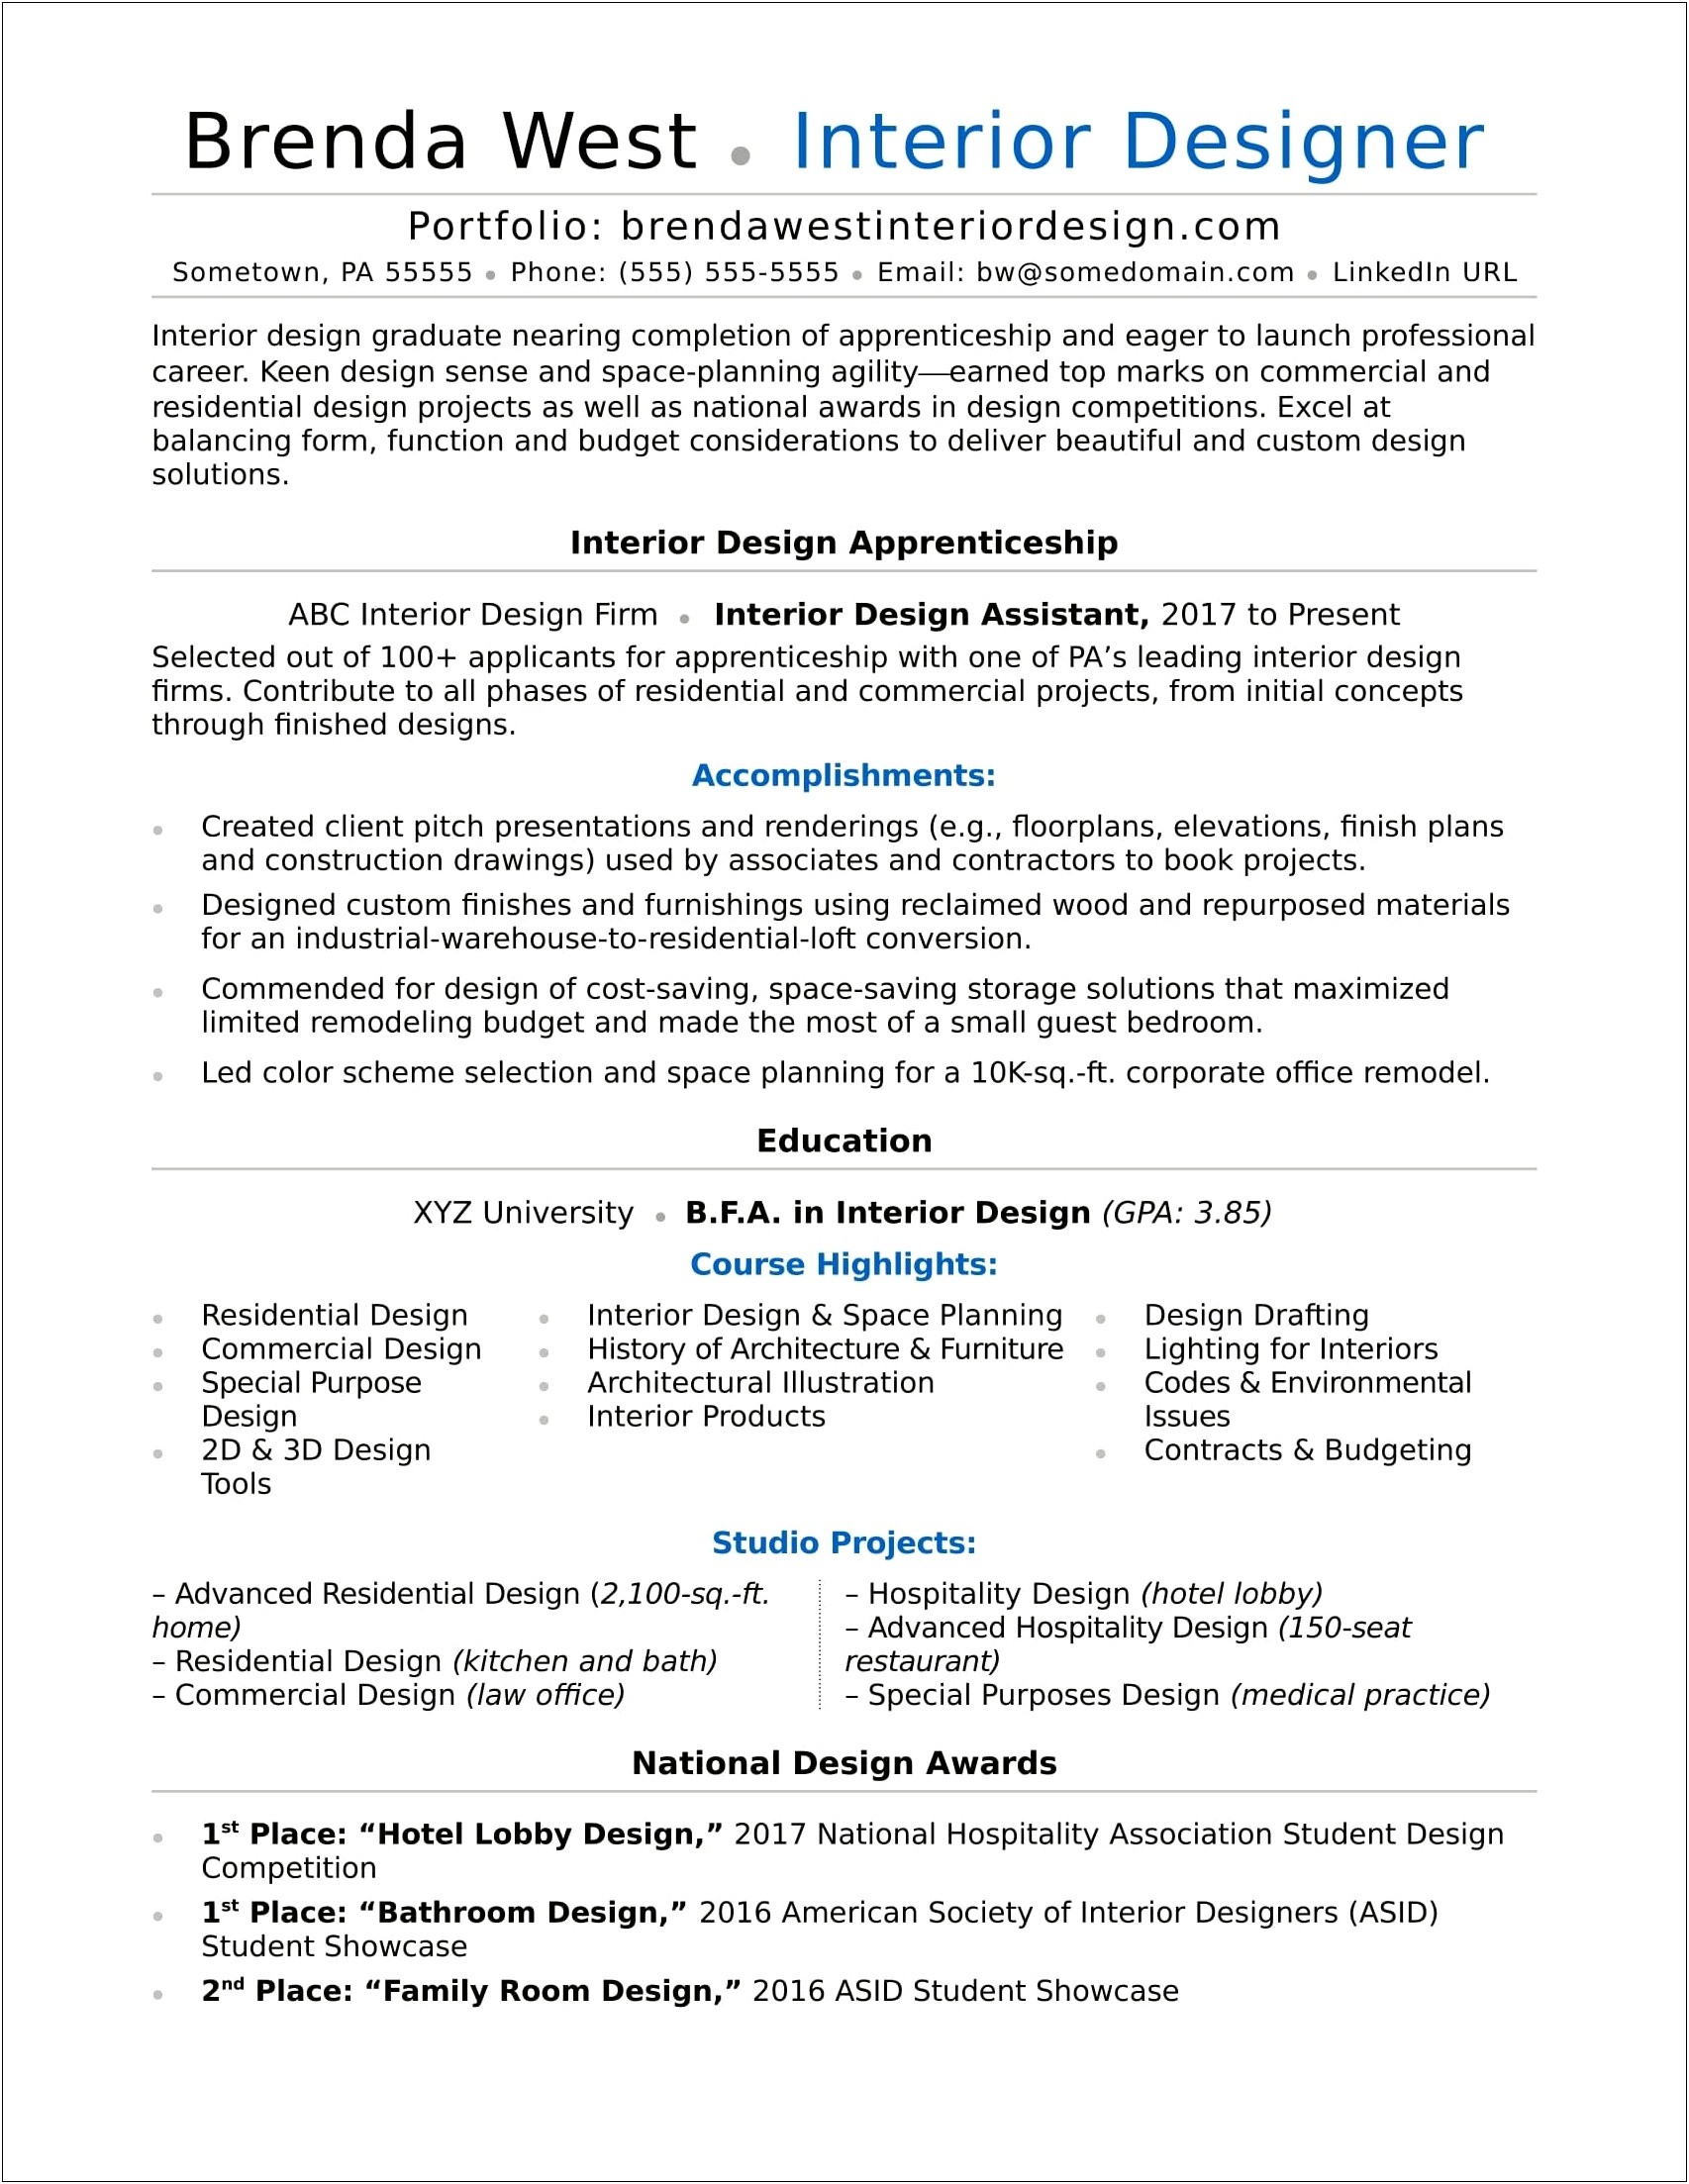 Personal Summary On Resume Example Art Director